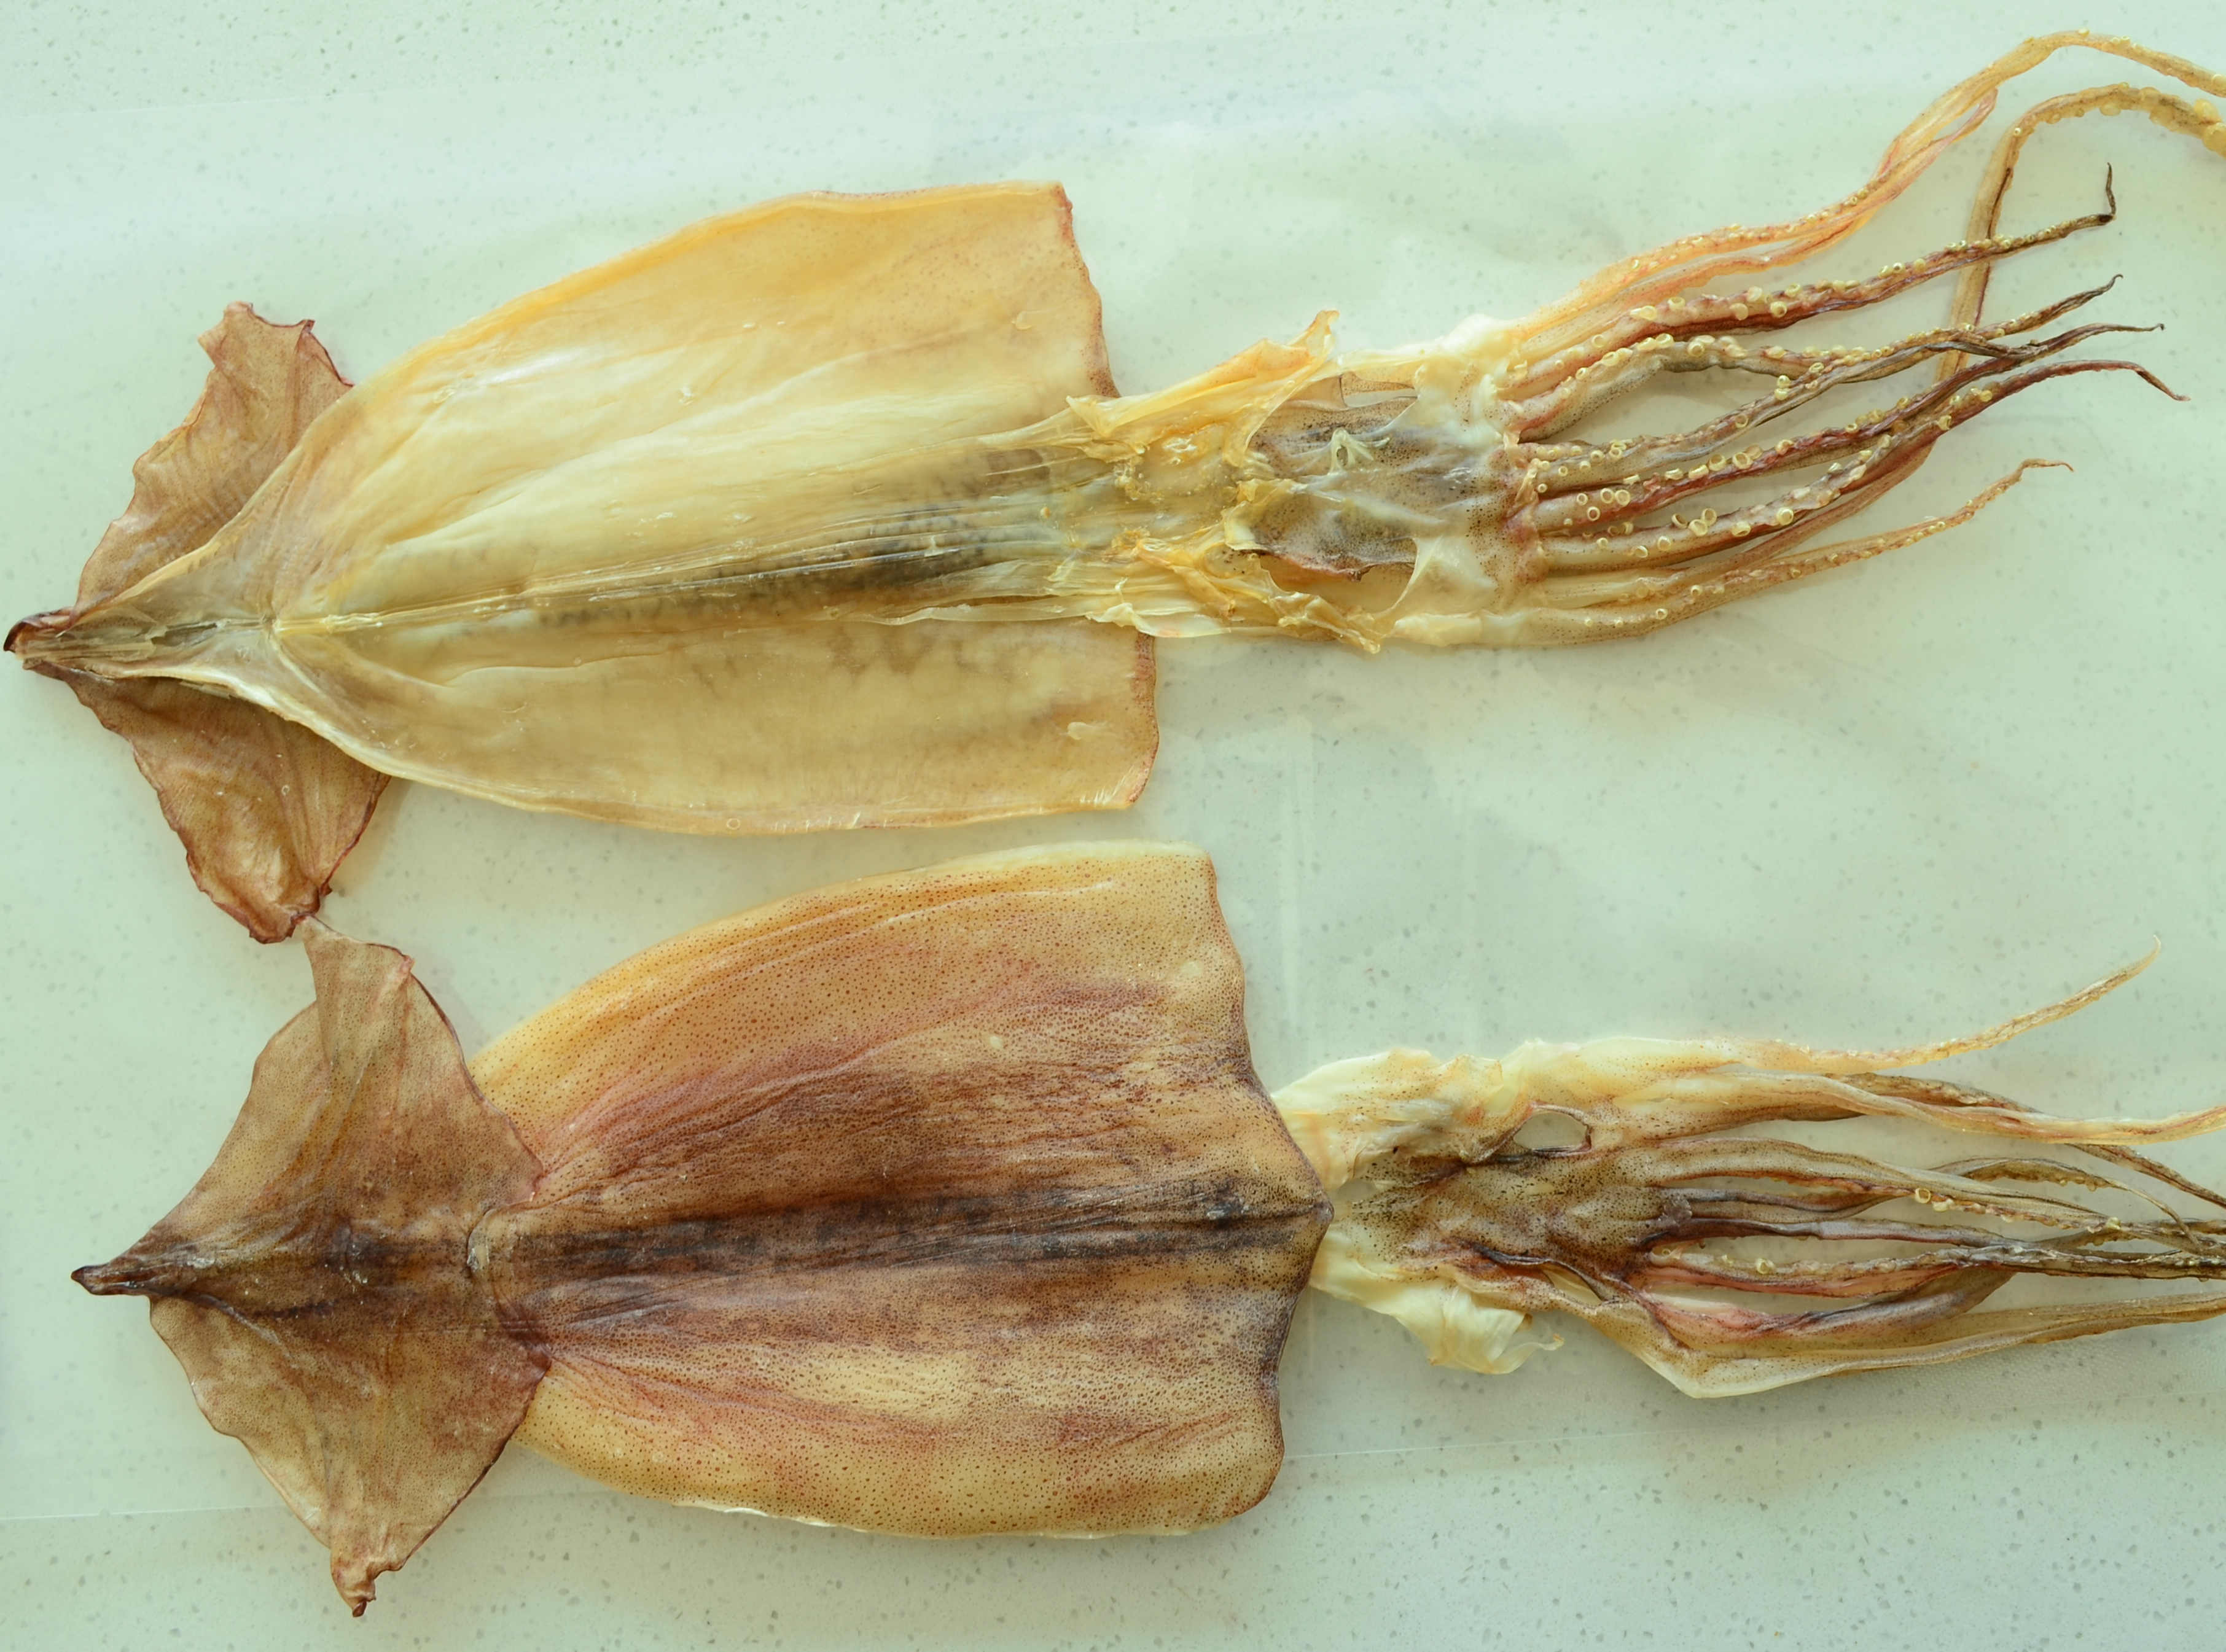 DRIED SQUIDDRIED SQUID (TODARODES)